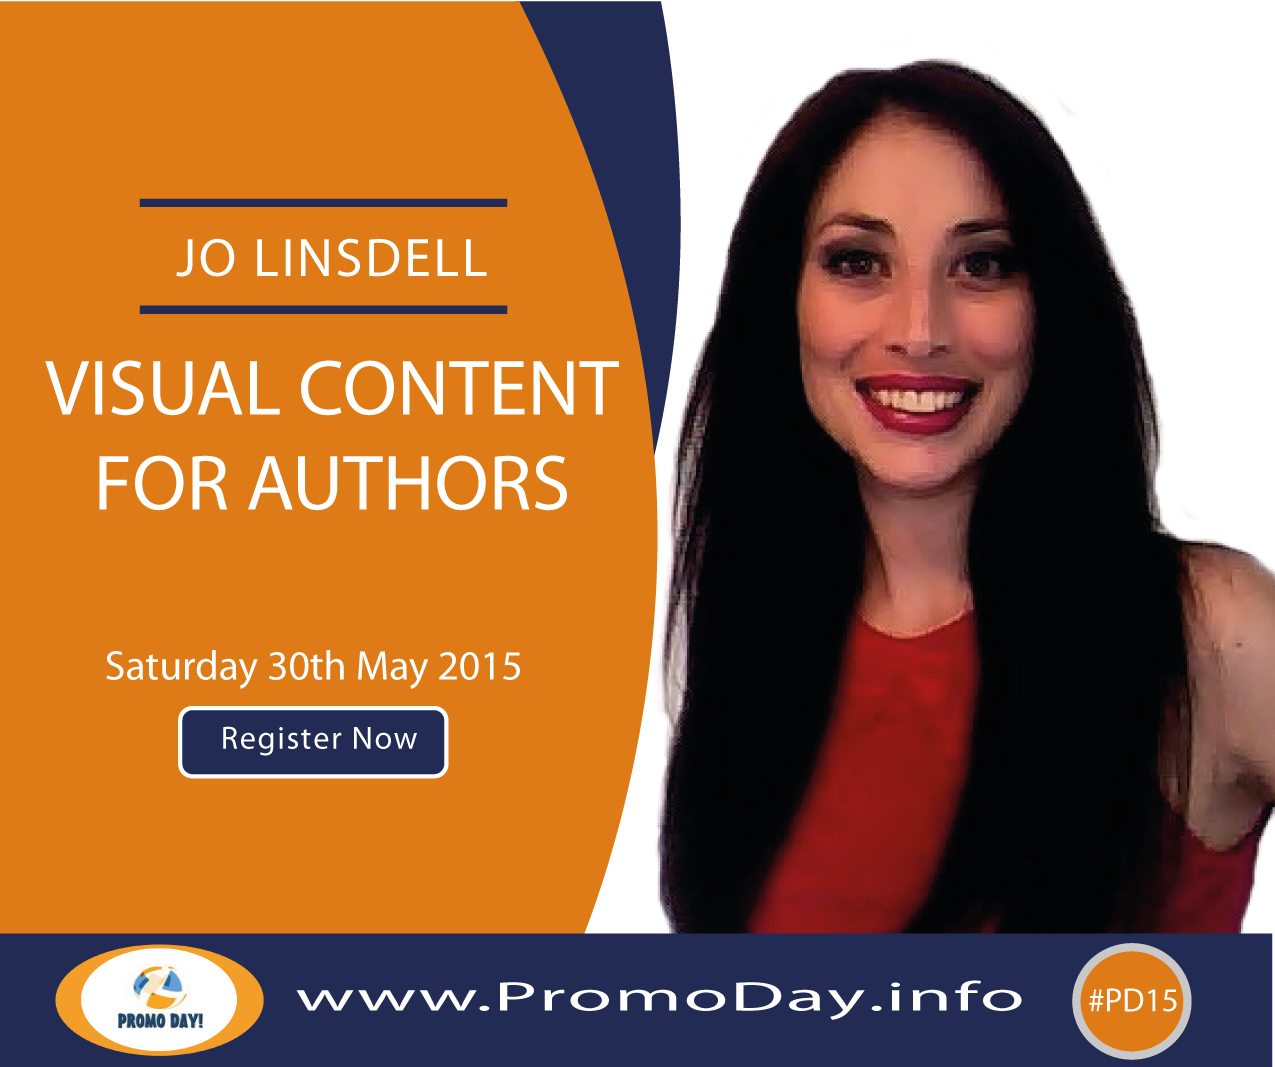 Join me at #PD15 for webinar "Visual Content for Authors"